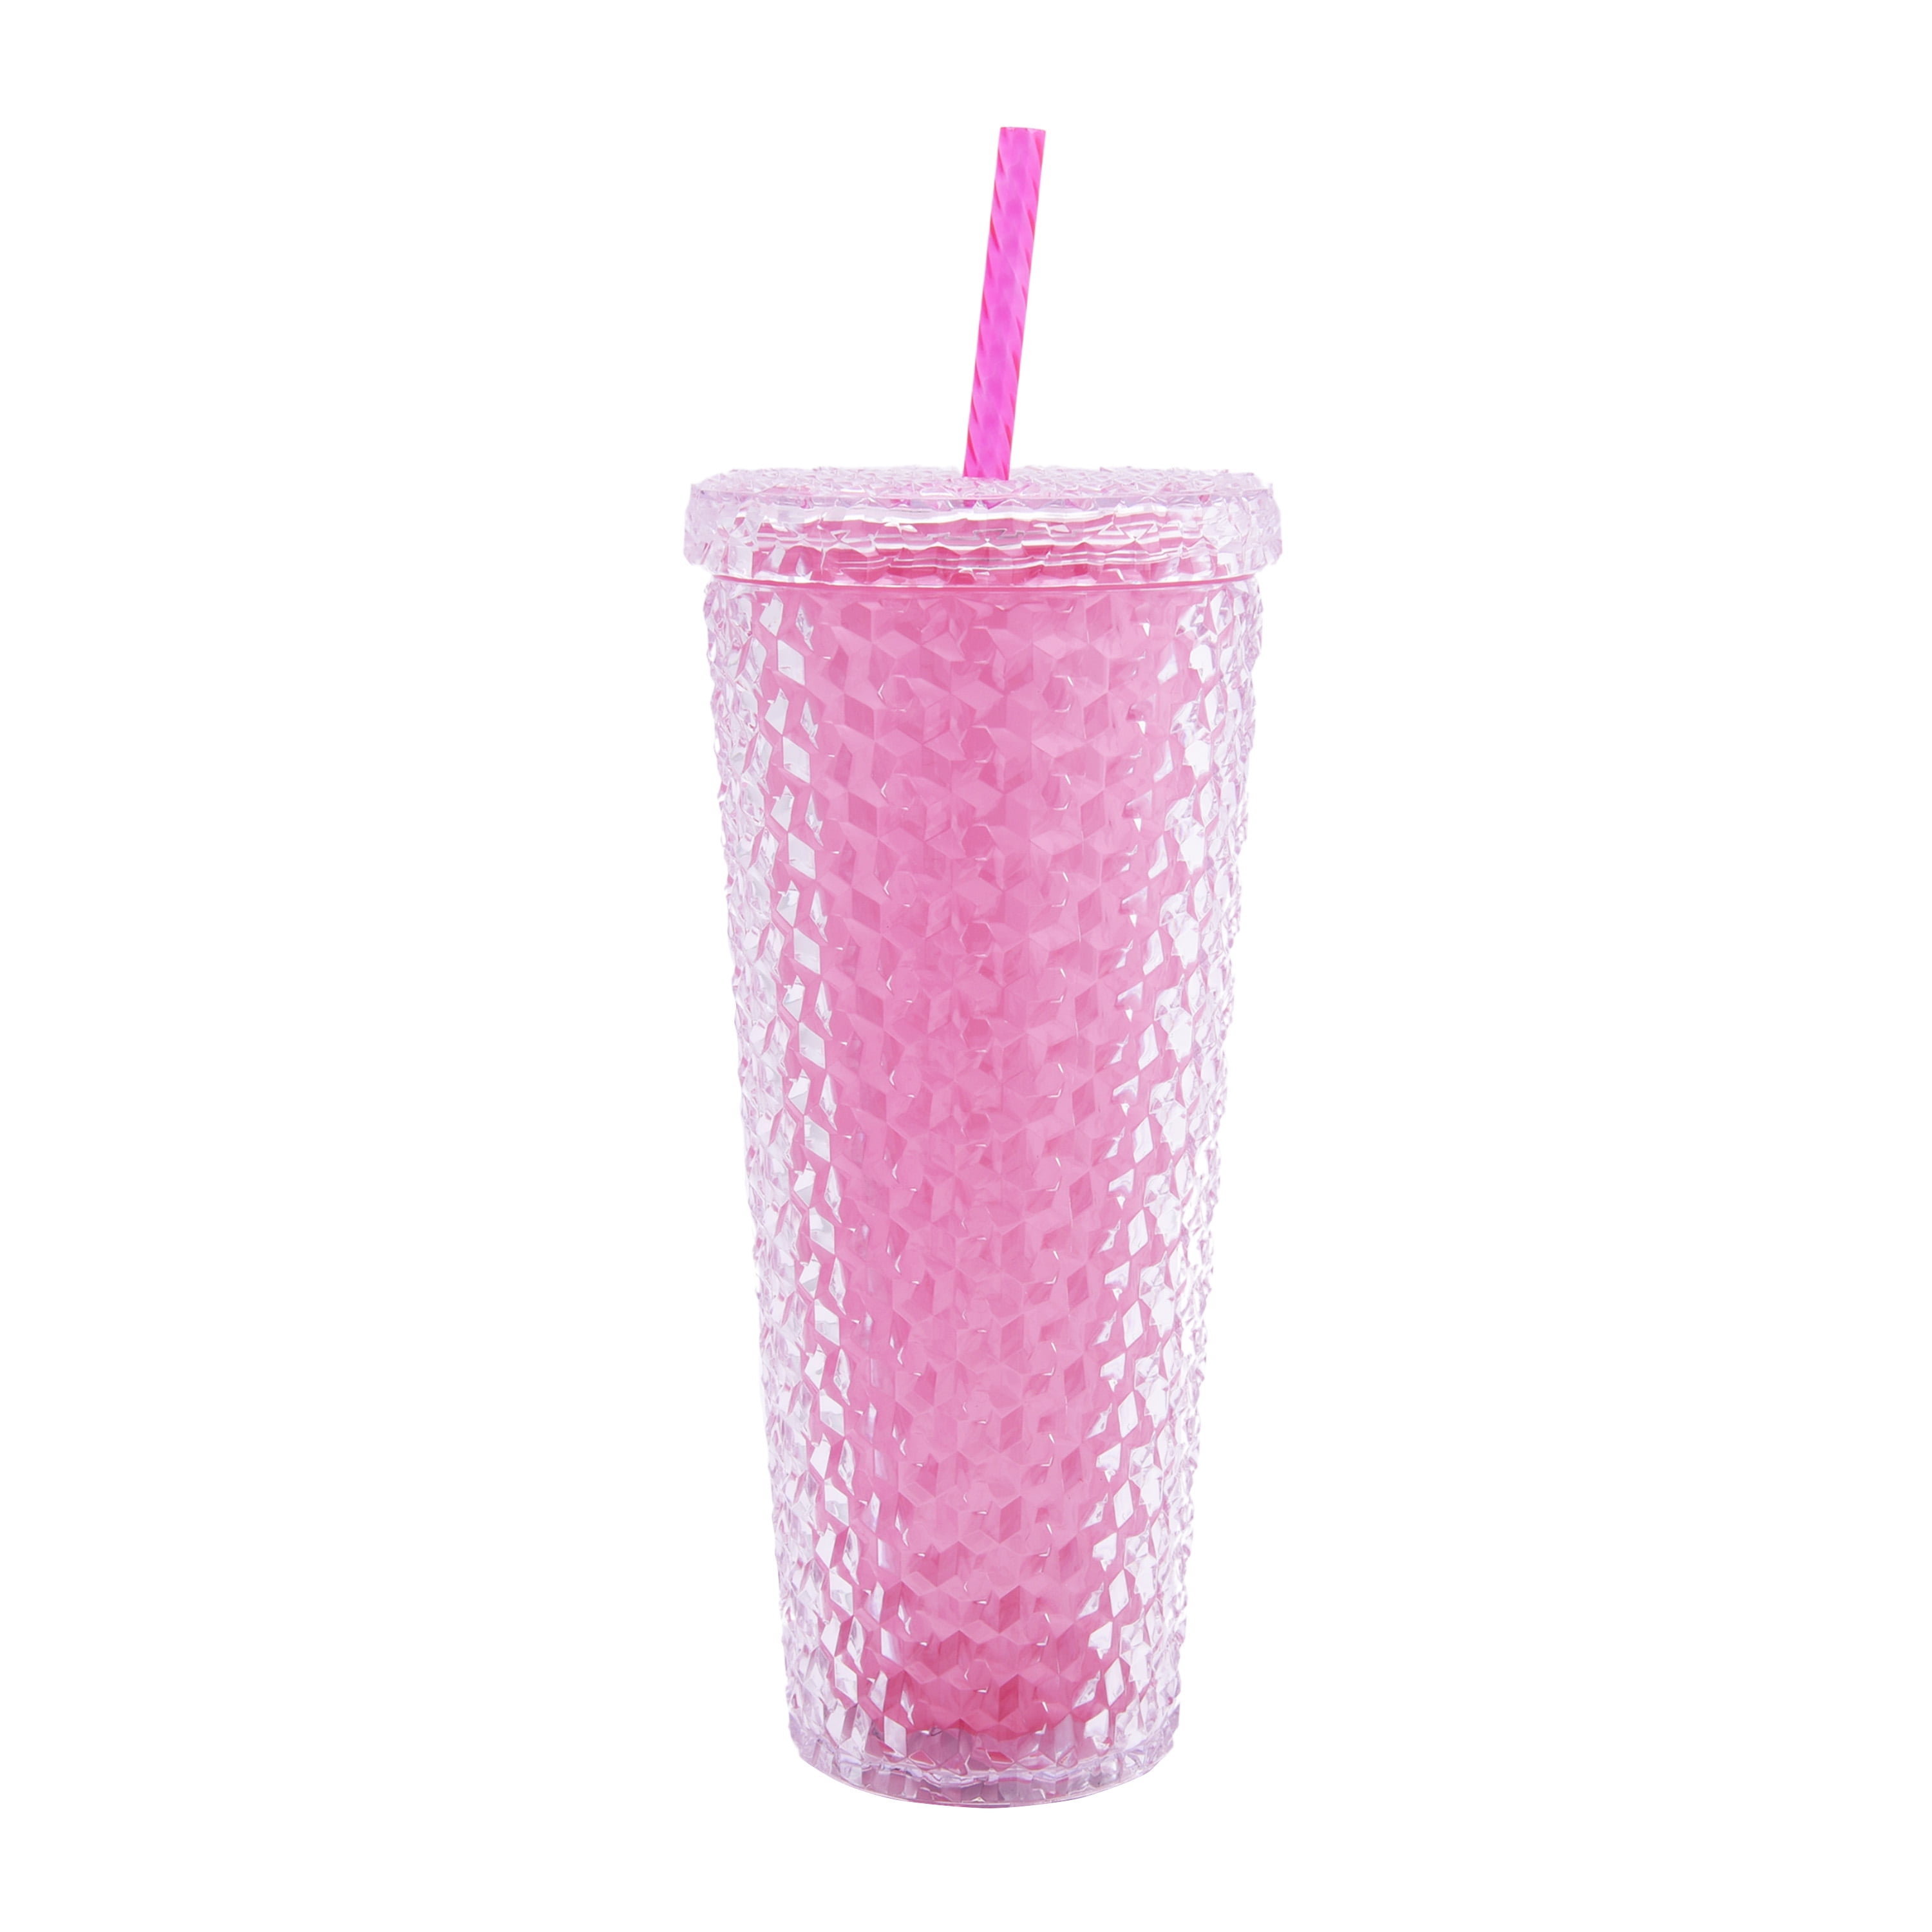 Mainstays 26-Ounce Acrylic Color Changing Textured Tumbler with Straw, Pink